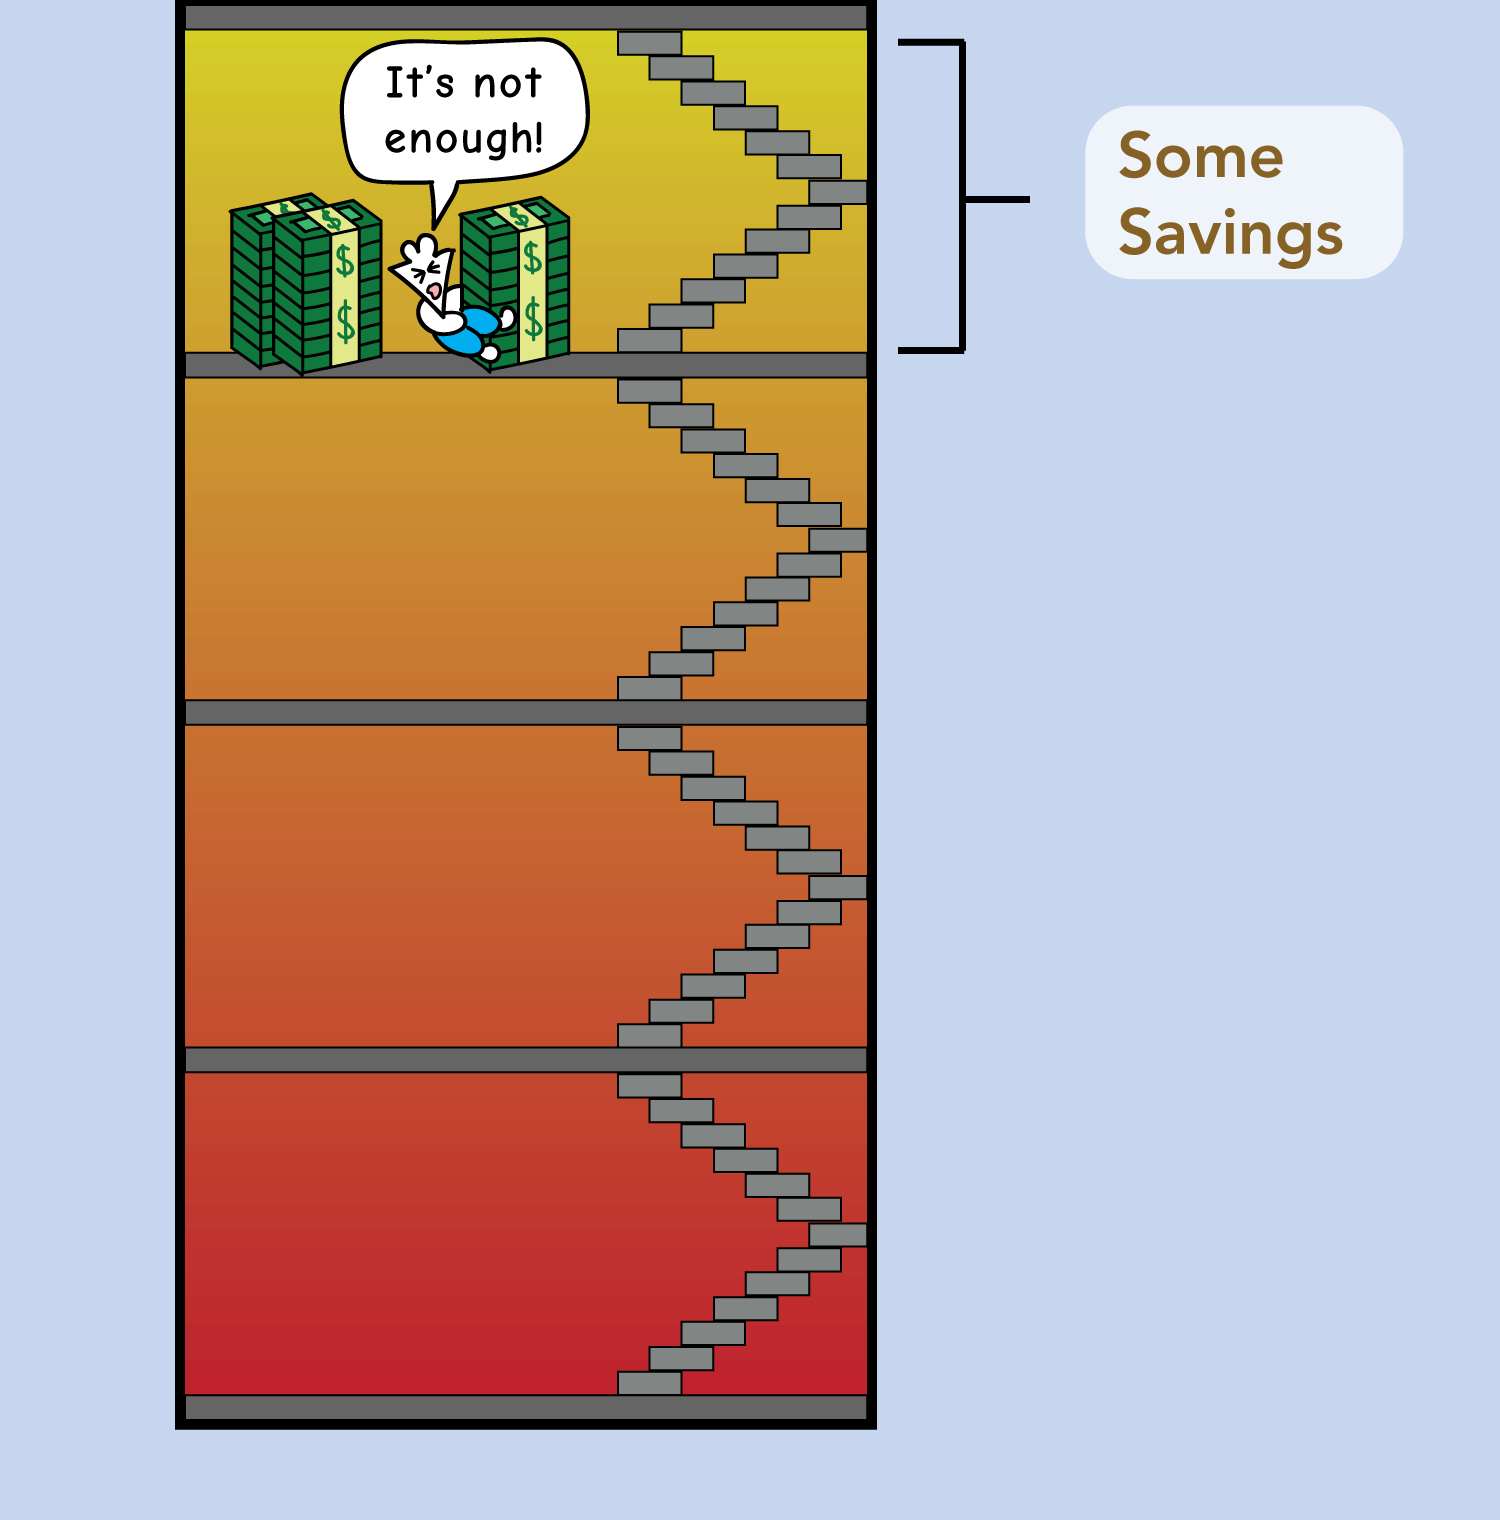 how much savings is enough